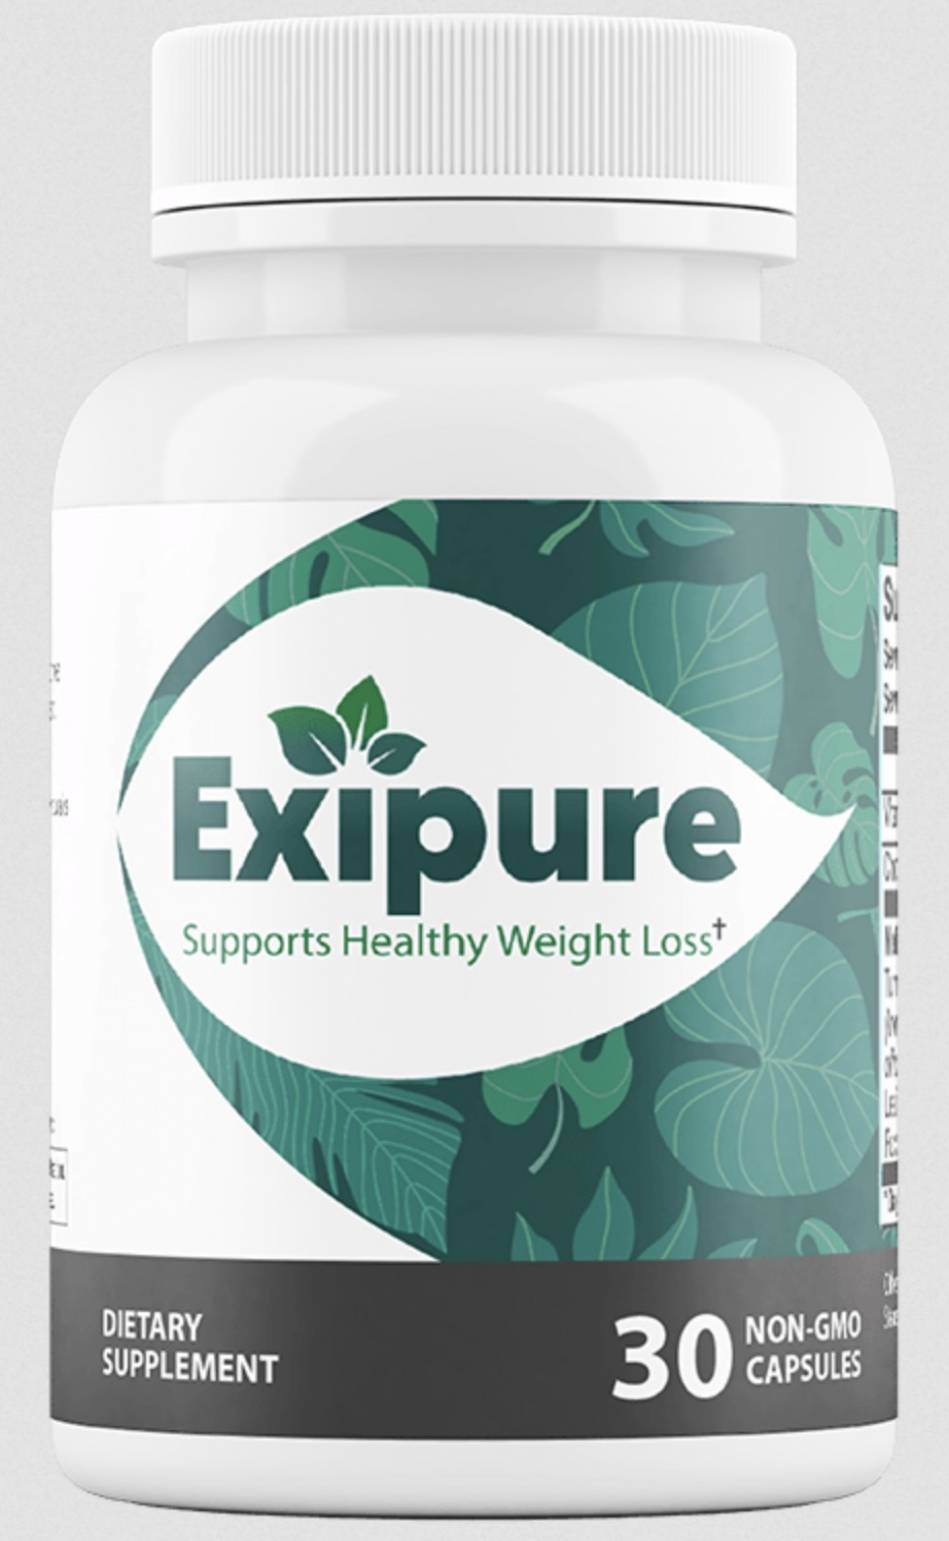 Who Makes Exipure Products